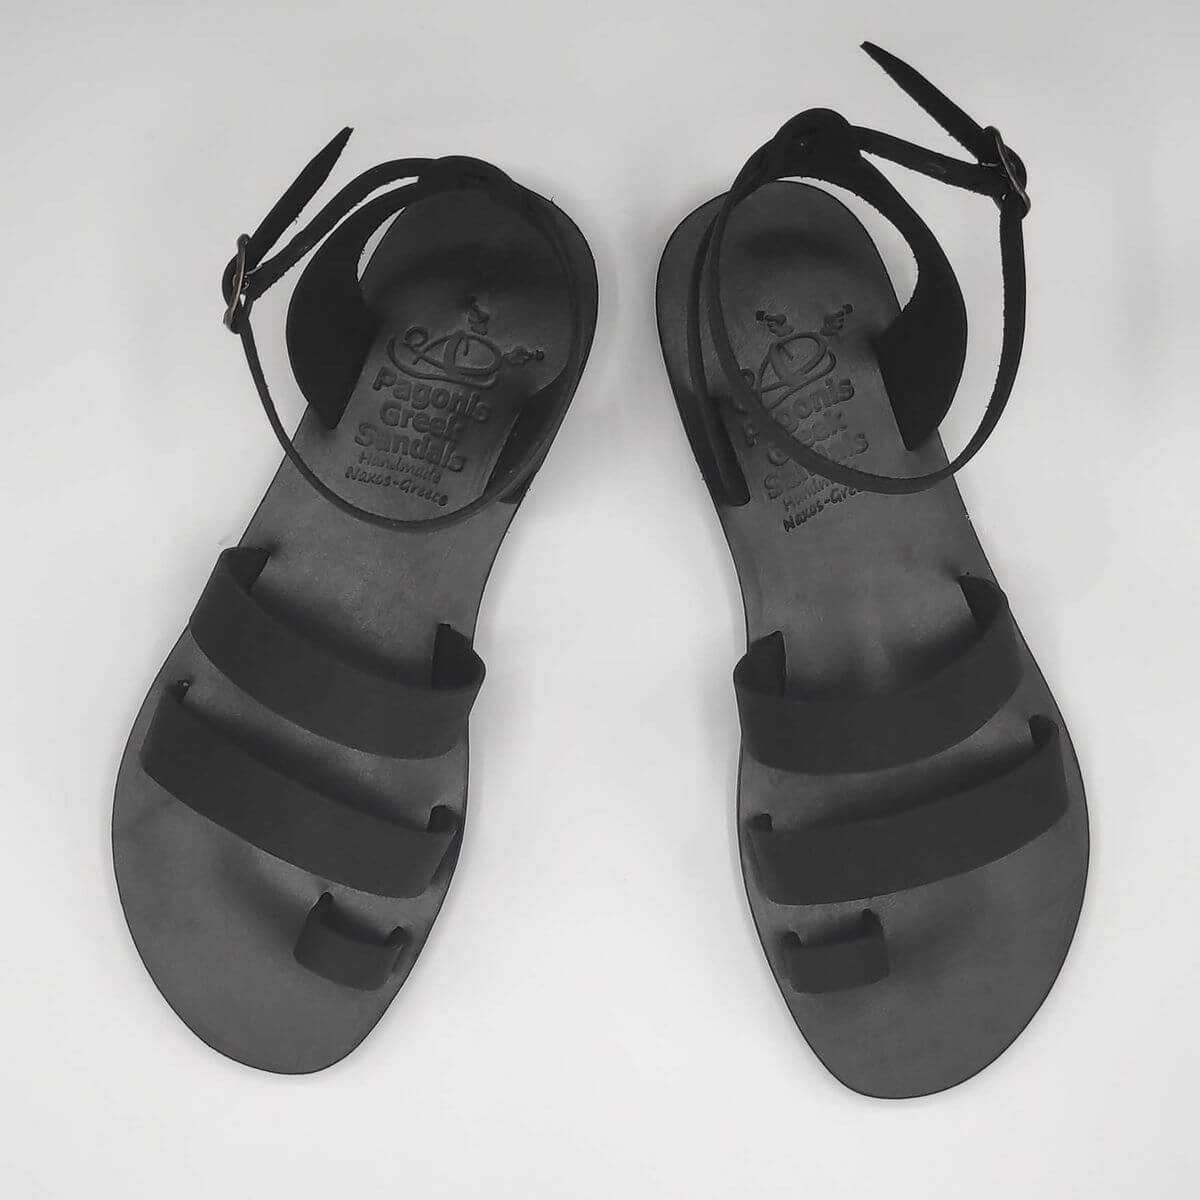 Black Nubuck leather dressy sandals with two straps, toe ring and high ankle strap, top view